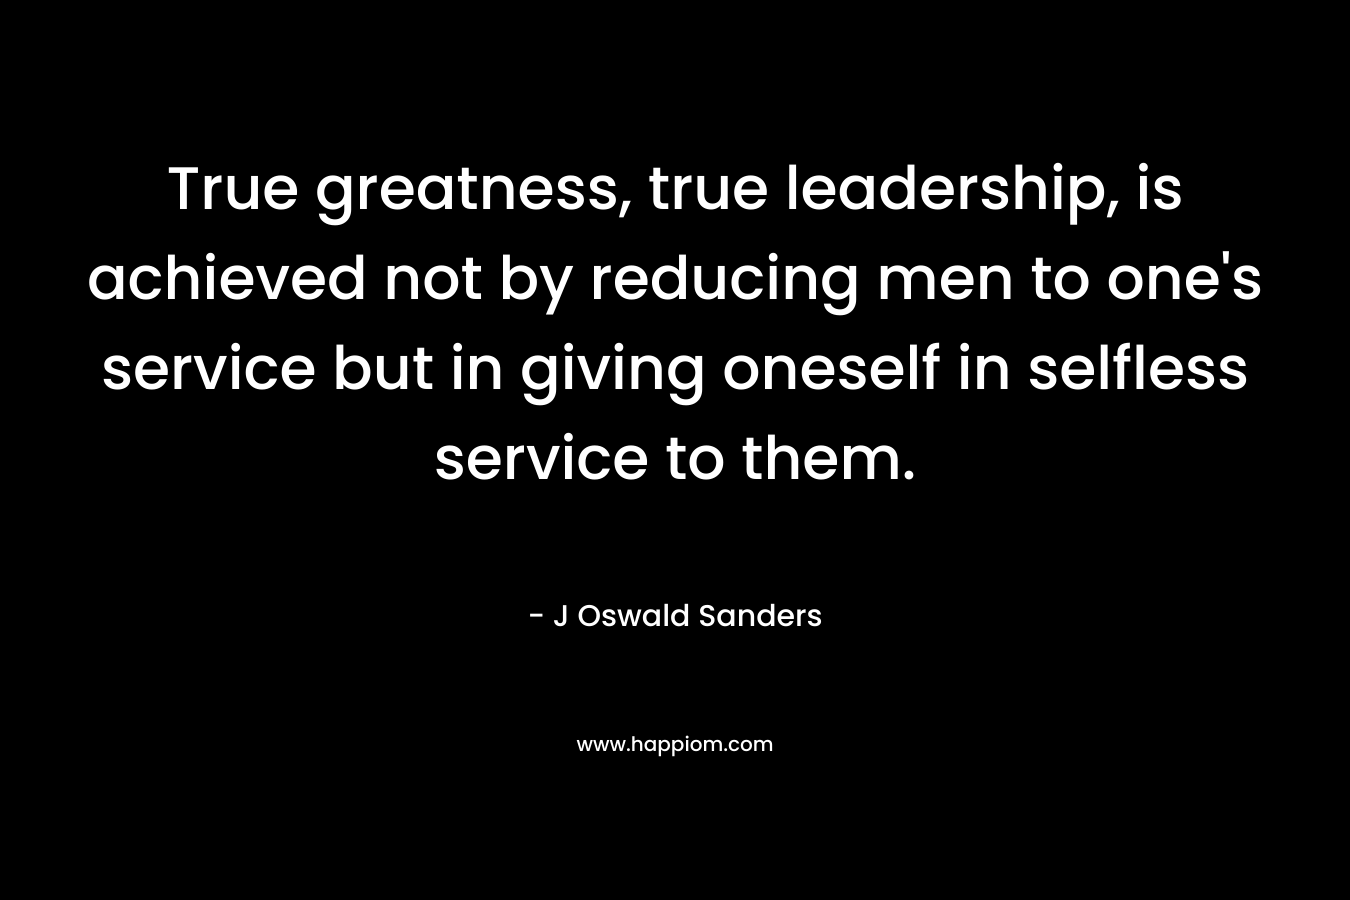 True greatness, true leadership, is achieved not by reducing men to one's service but in giving oneself in selfless service to them.